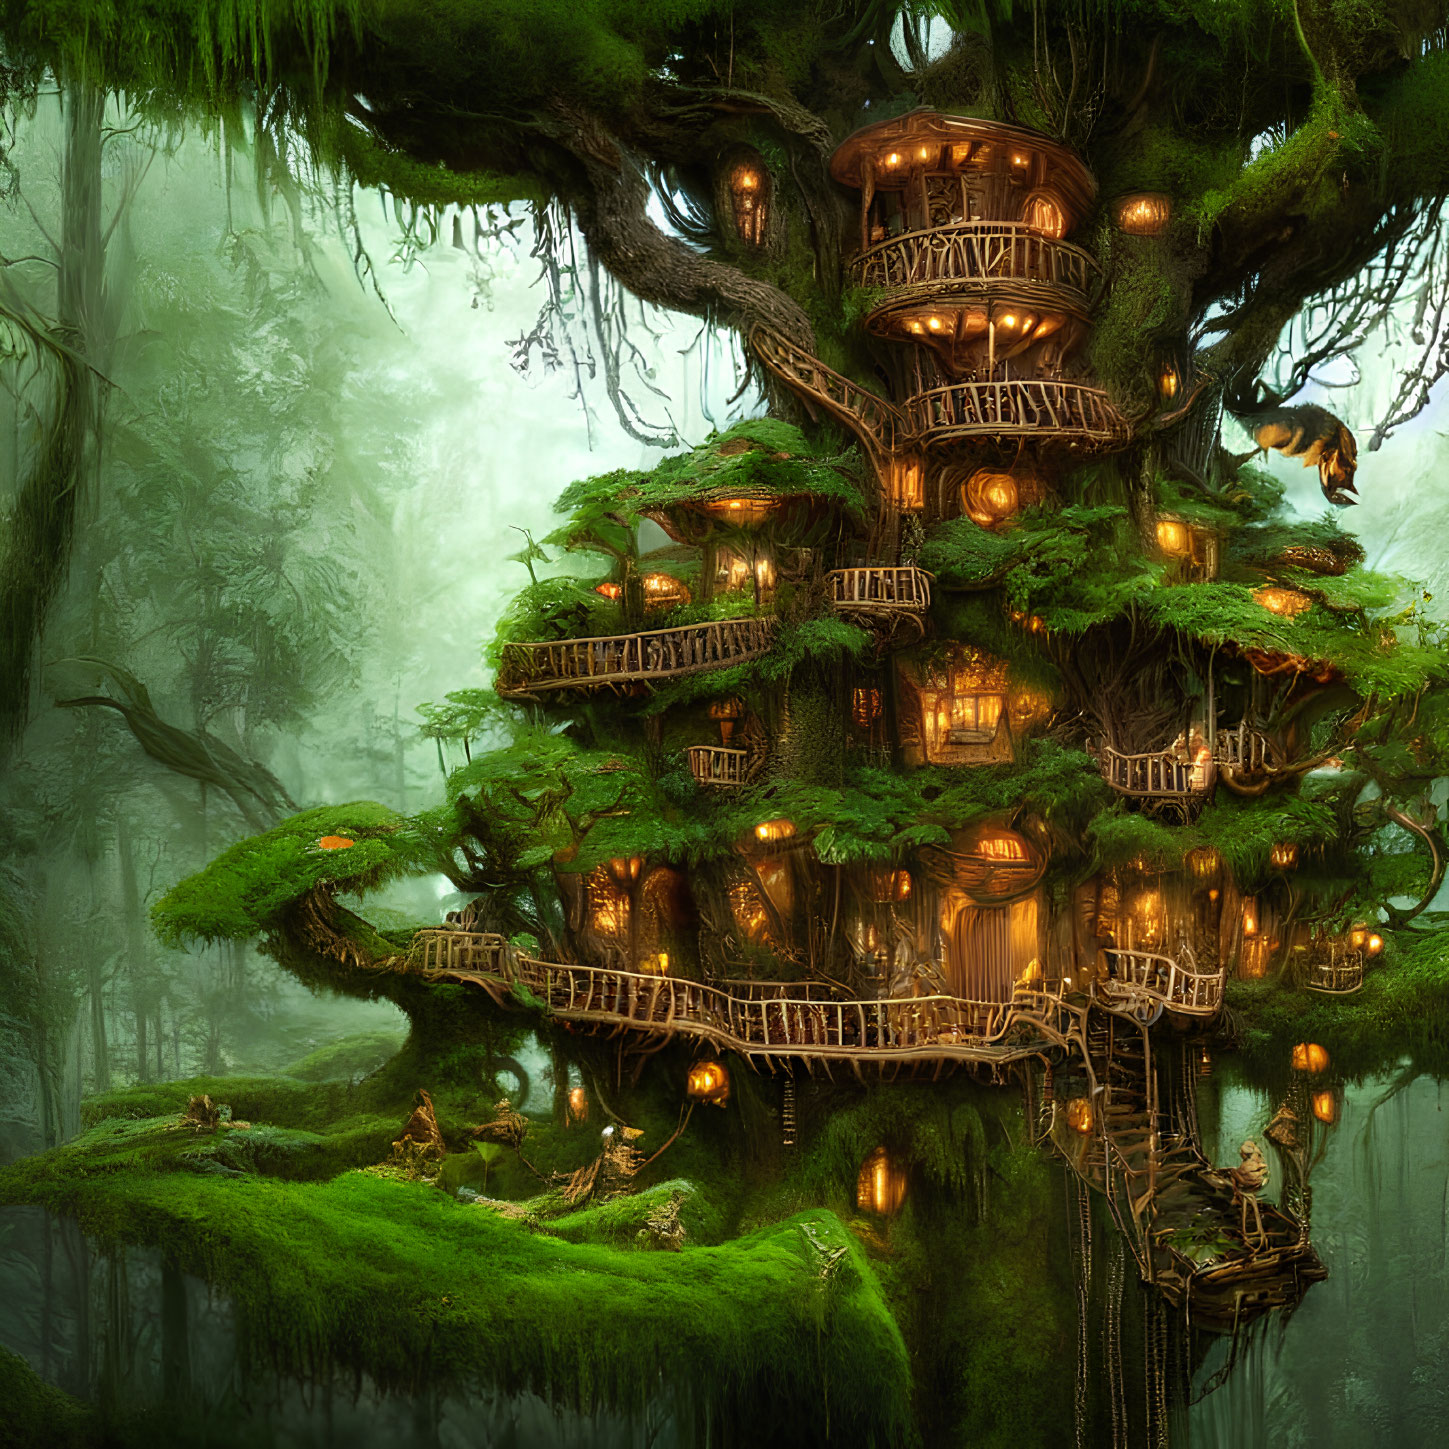 Enchanting multi-tiered treehouse in ancient moss-covered tree